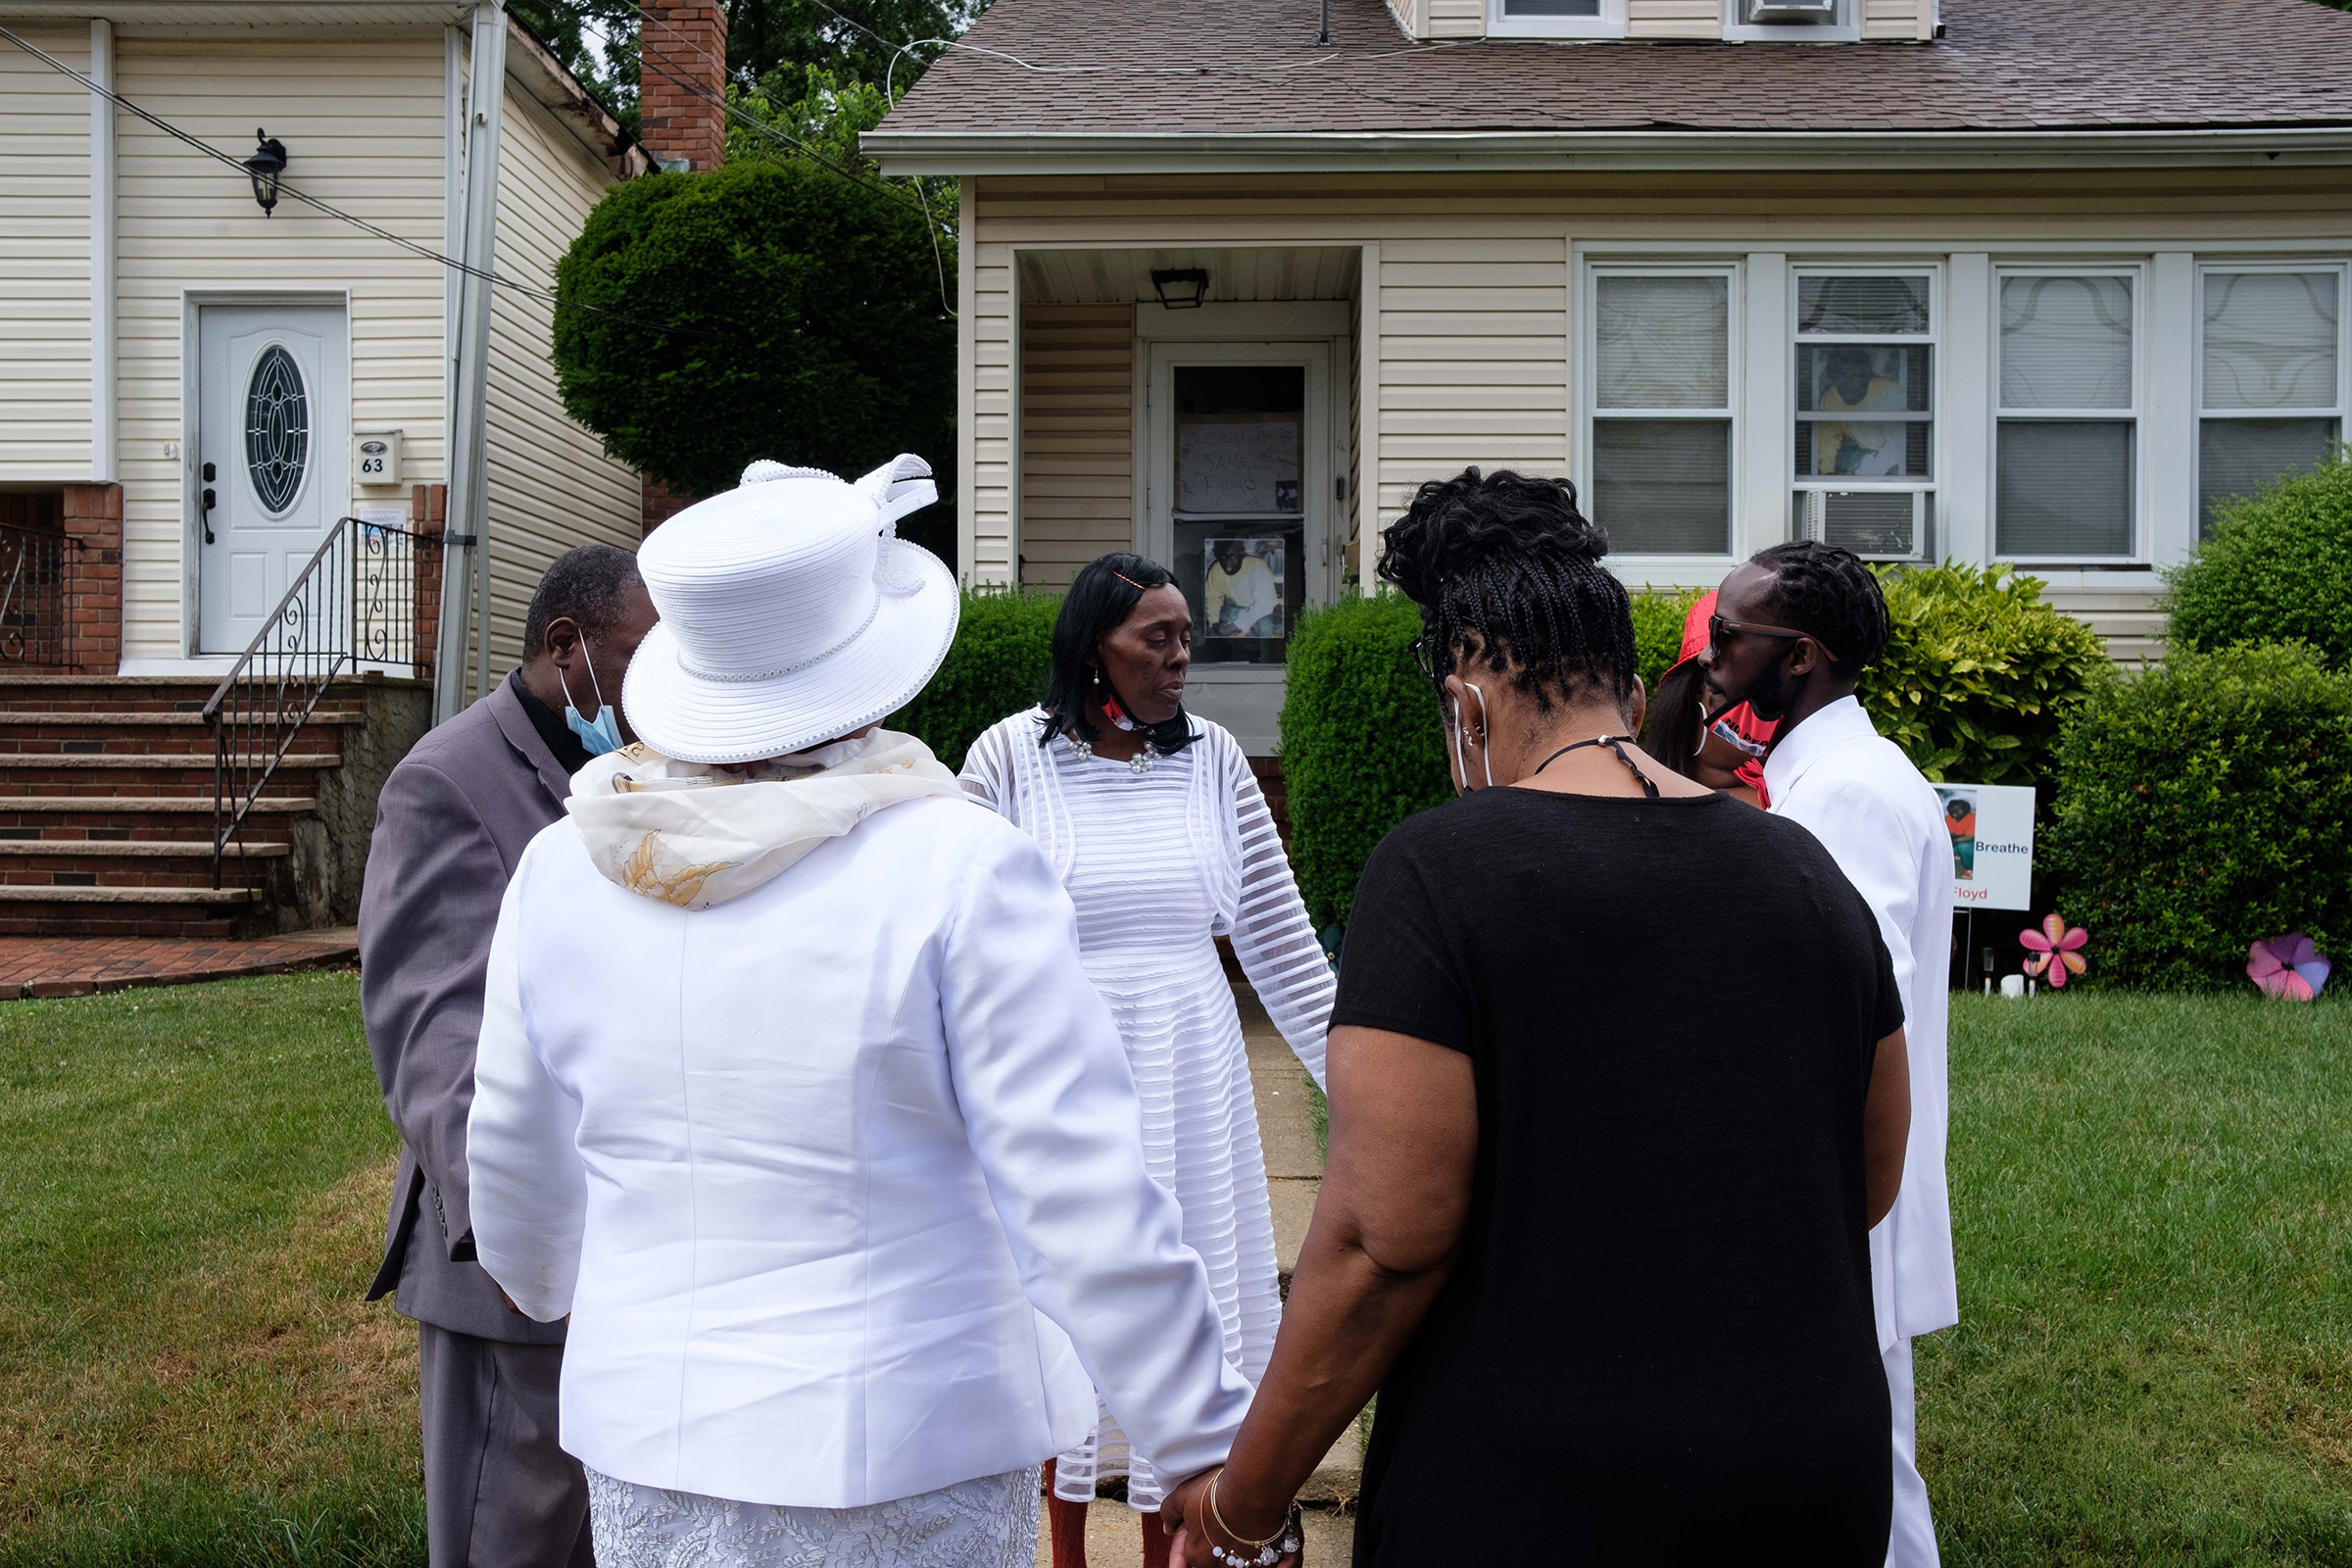 Family members stop to pray in front of his house during a procession from the church to Greenfield Cemetery in Hempstead, N.Y. (Yuki Iwamura)